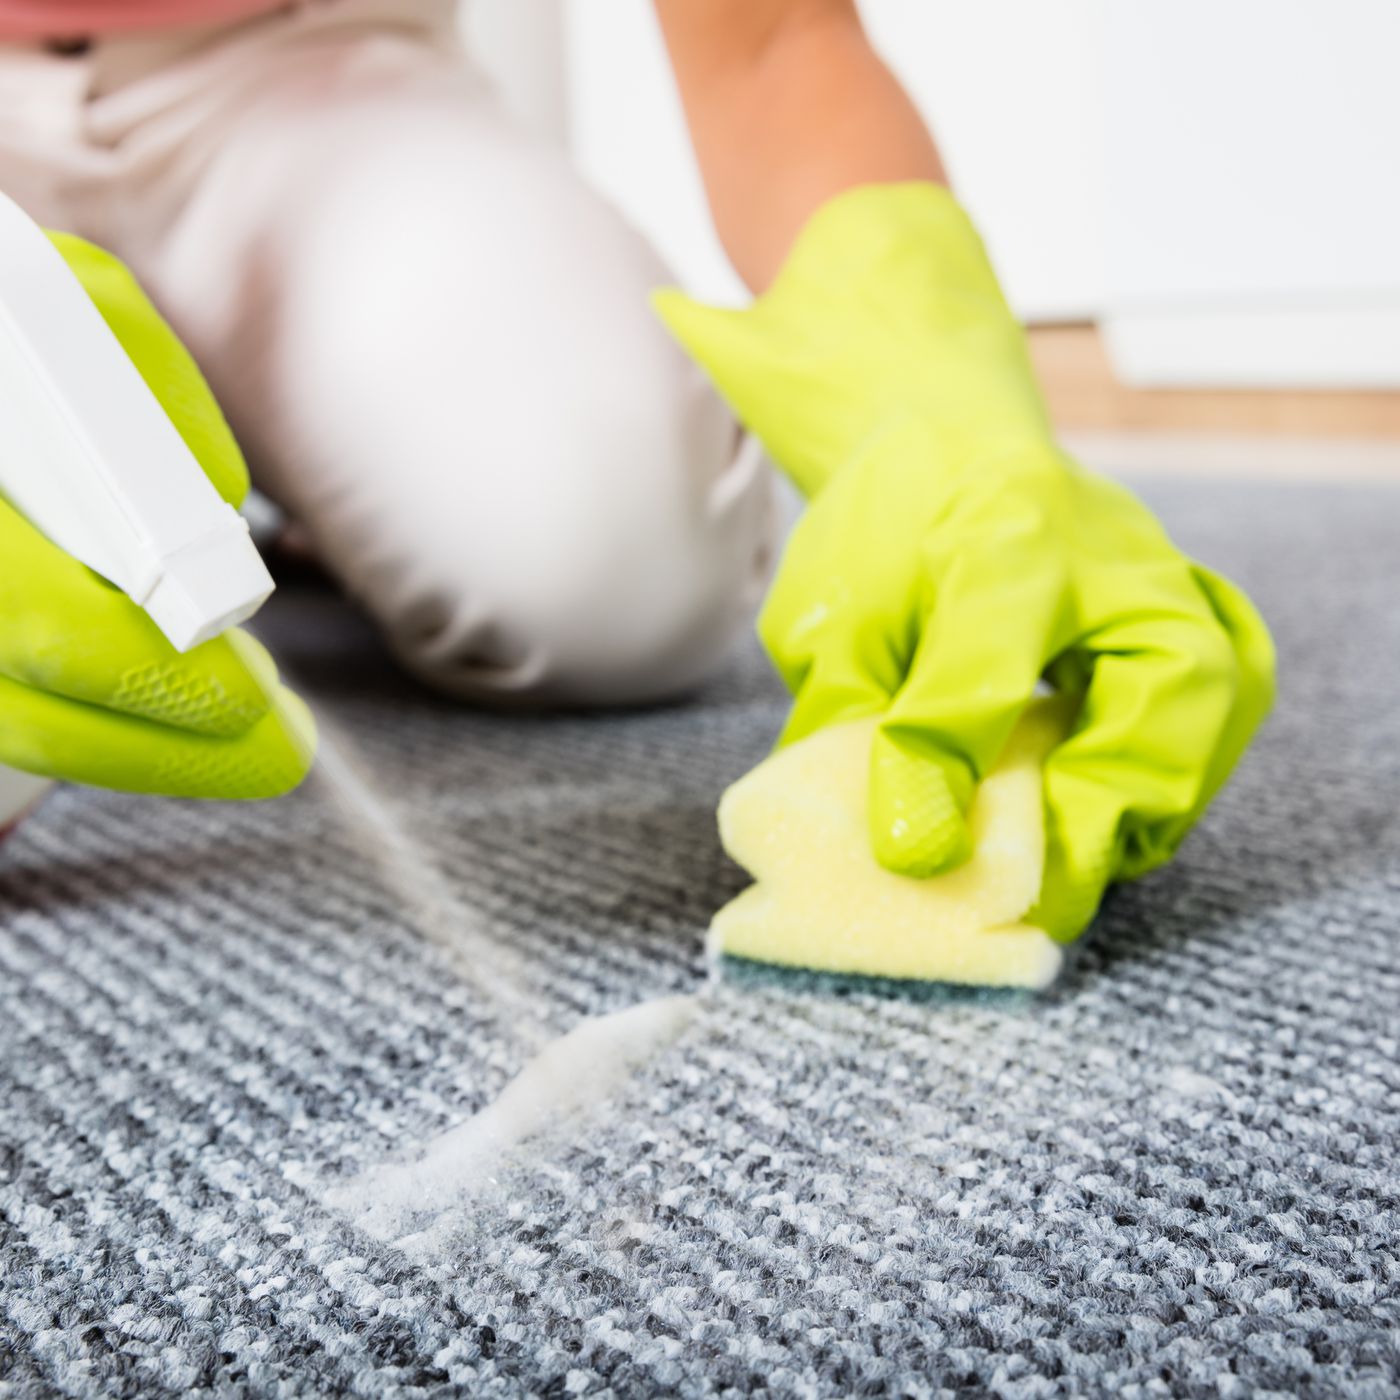 How To Get Stains Out Of A Carpet: Coffee, Urine & More - This Old House